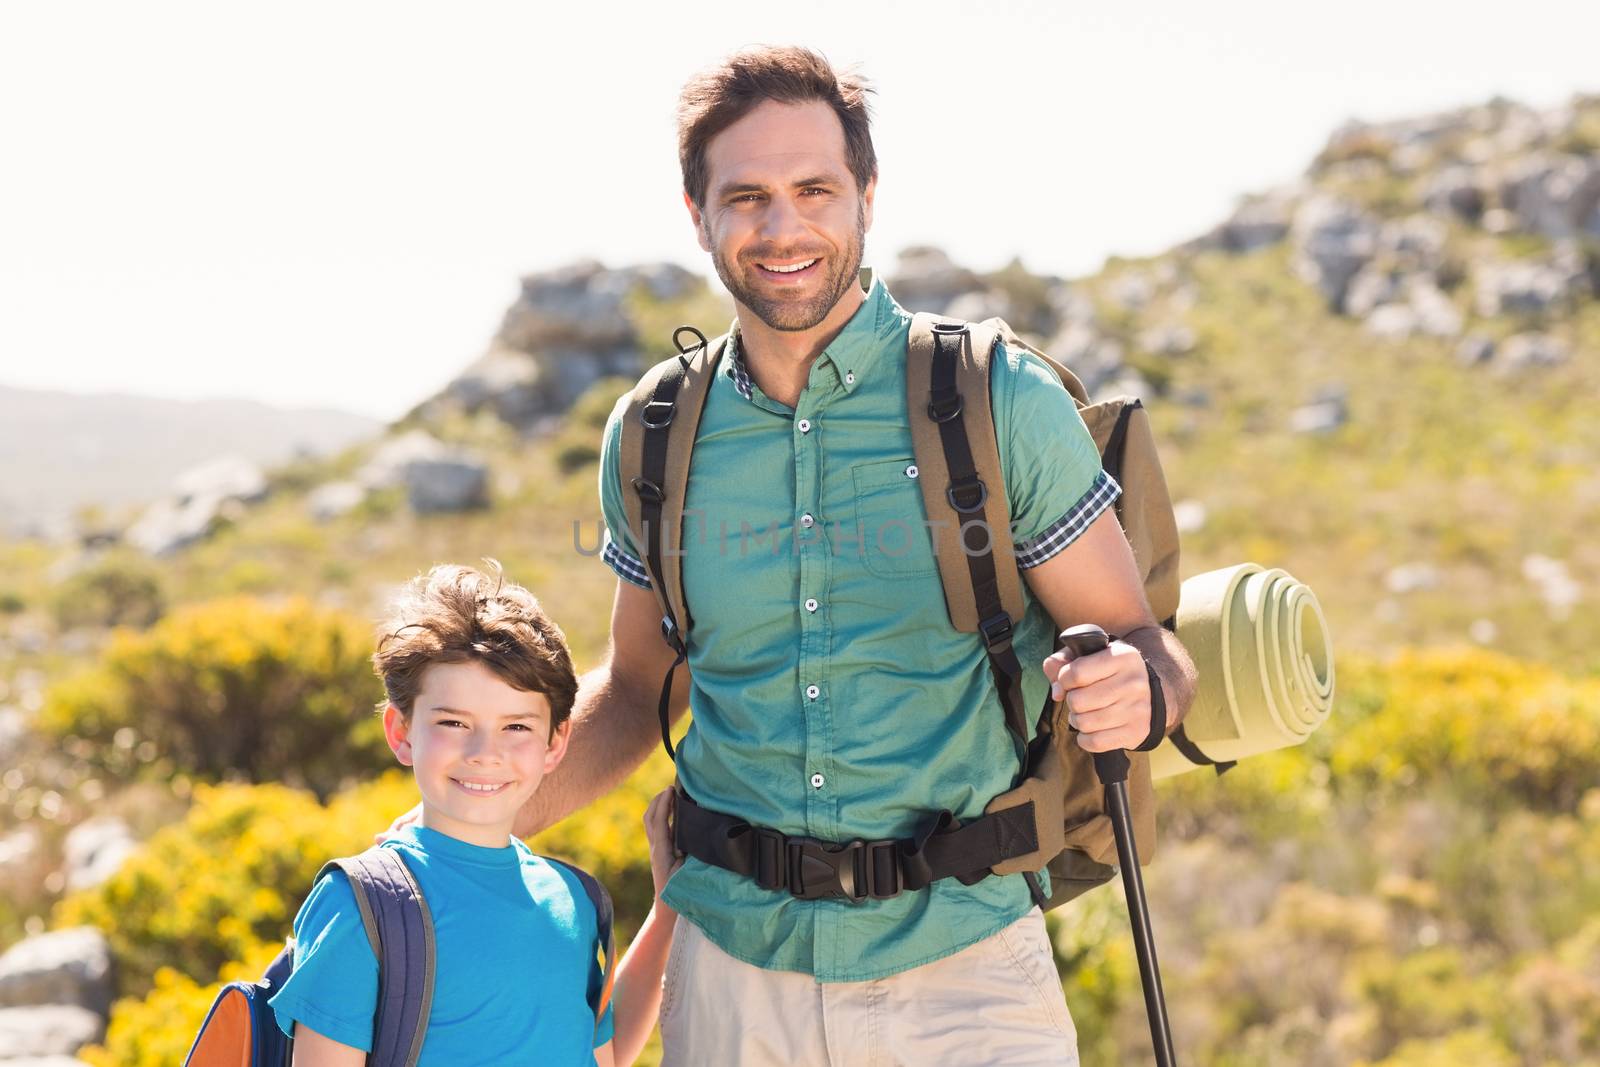 Father and son hiking through mountains on a sunny day